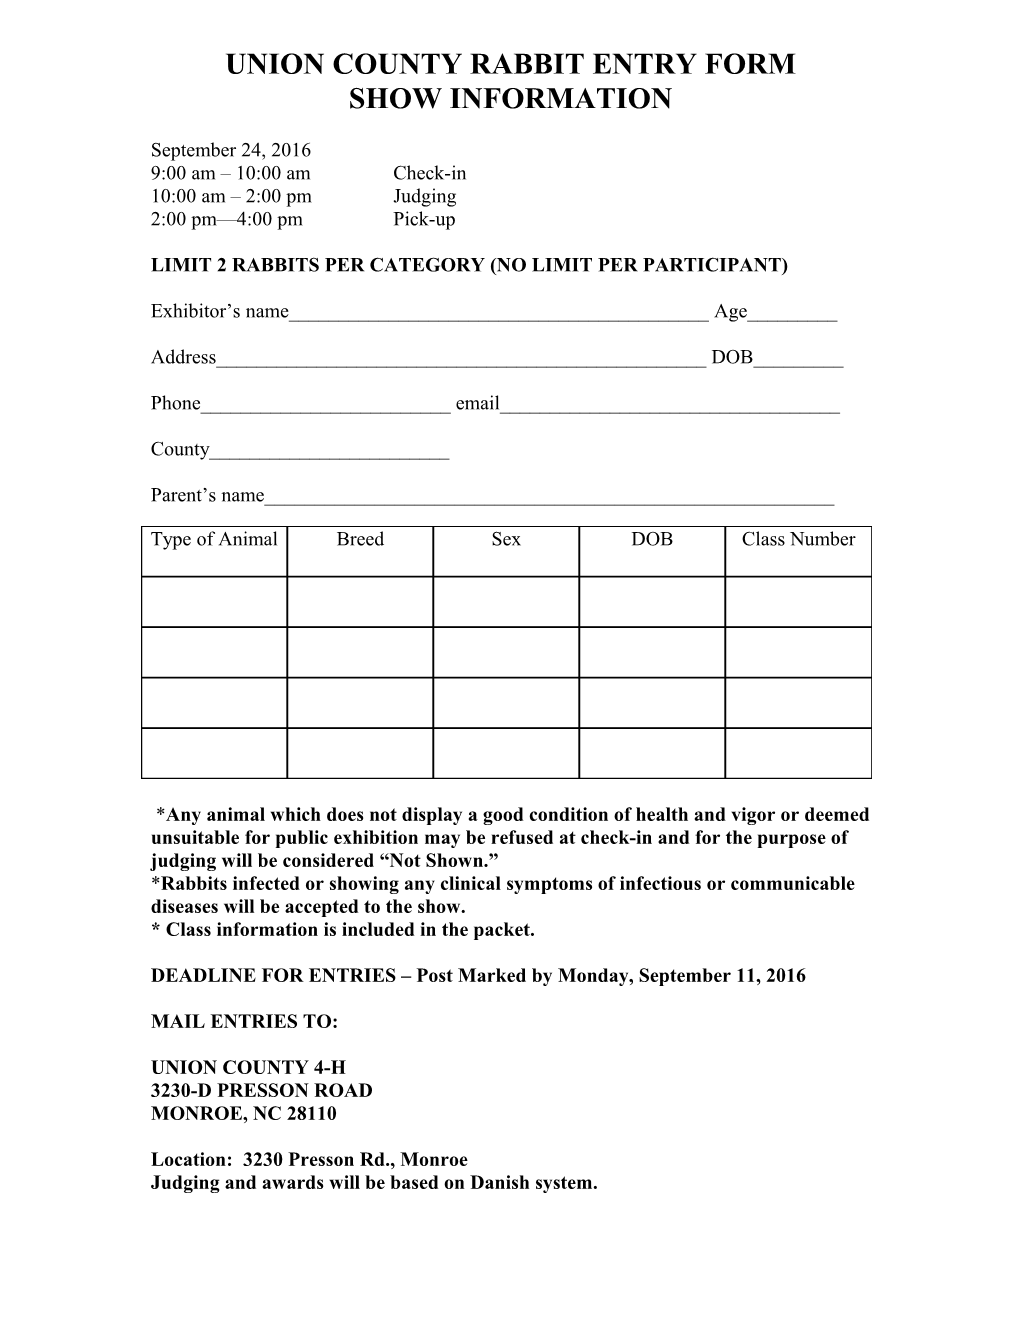 Union County Livestock Entry Form